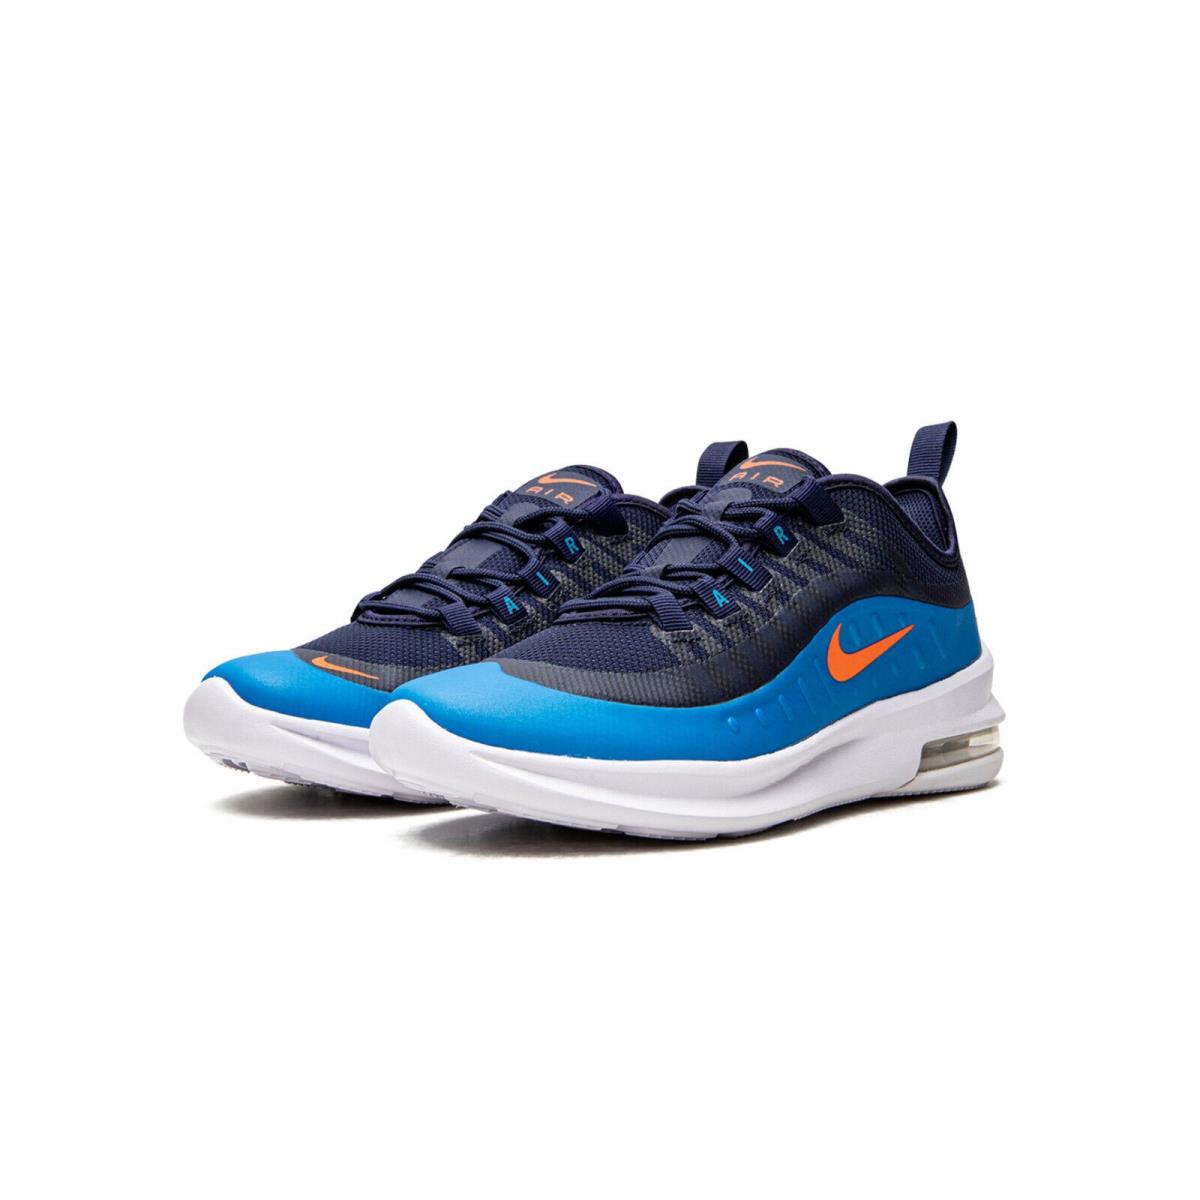 Nike Air Max Axis Navy Blue Running Shoes AH5222 402 - Size 6.5Y / 8 Womens - Multicolor